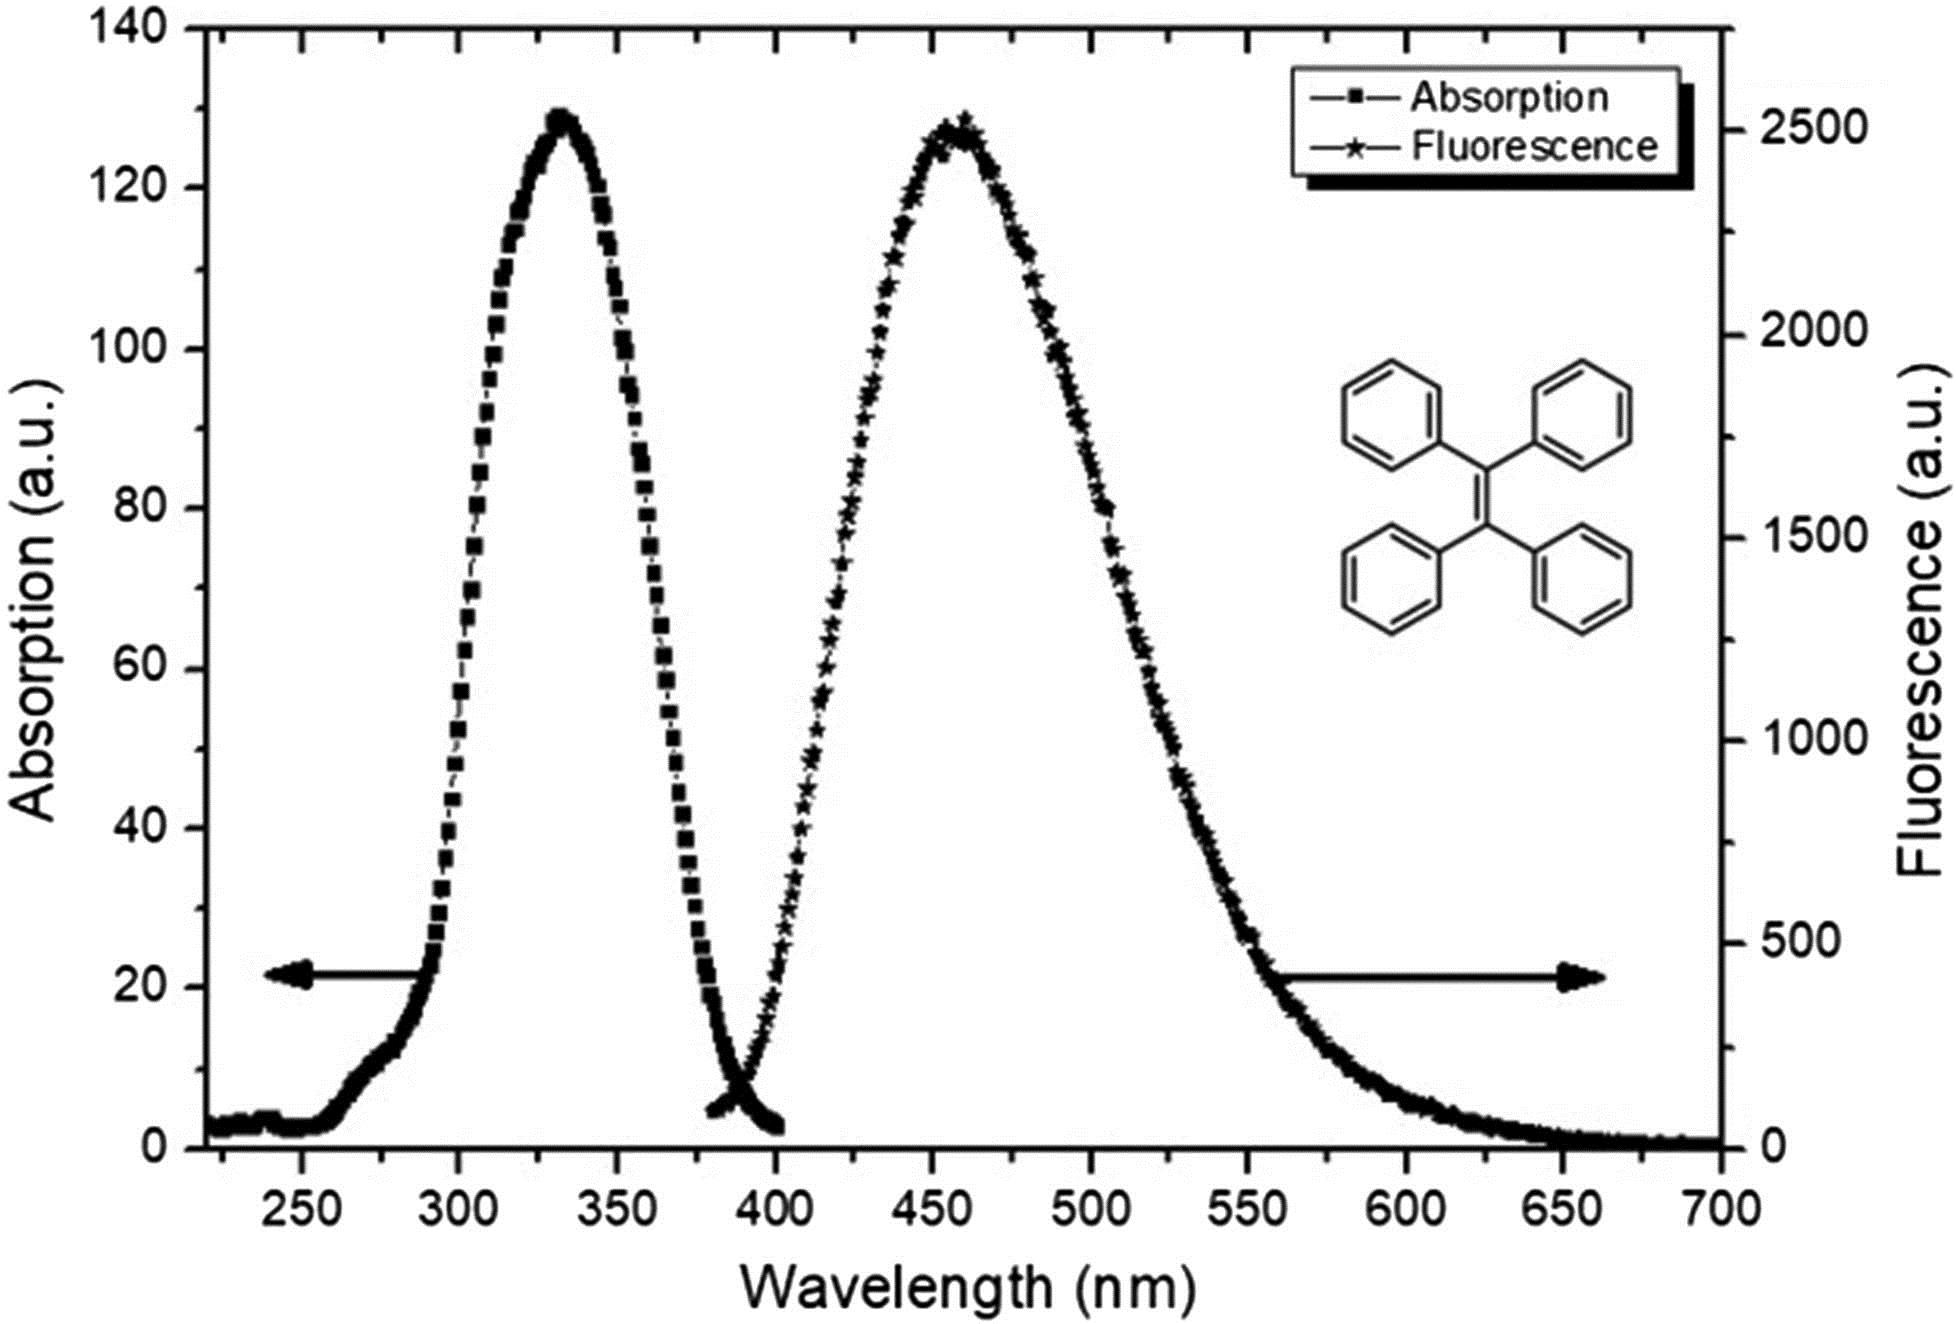 TPE absorption and fluorescence spectra. The inset shows the TPE molecule structure.